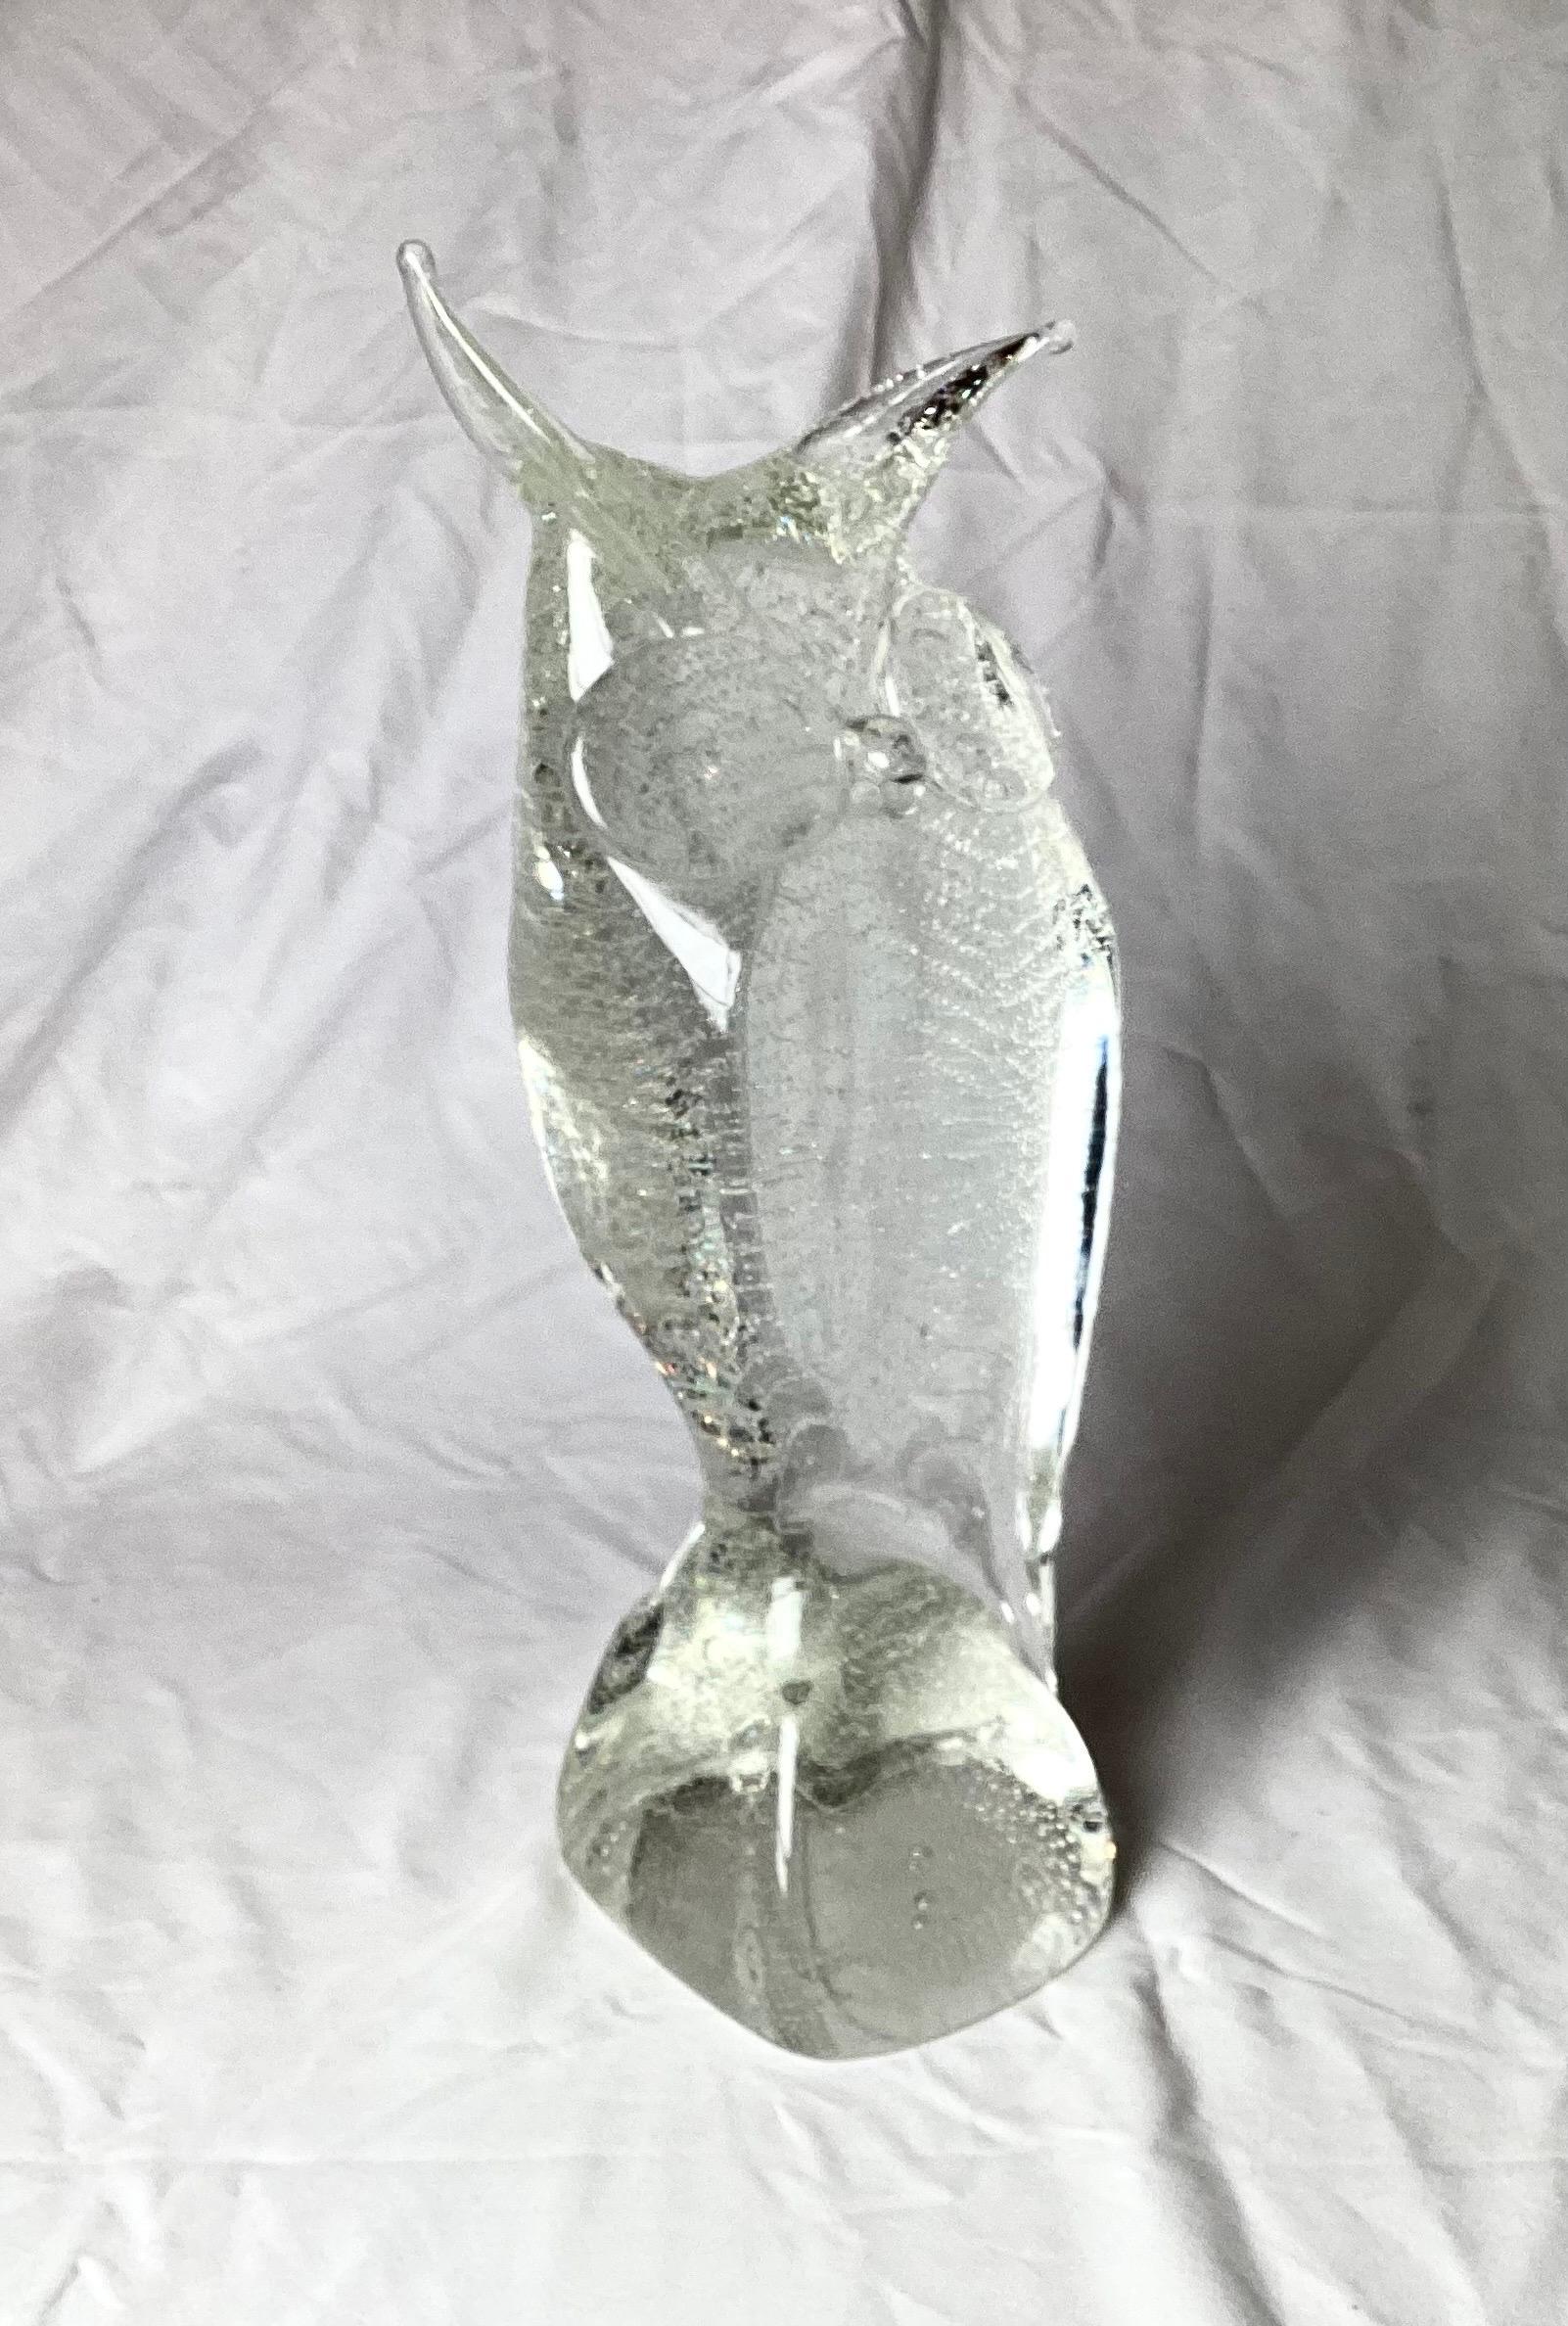 A Beautiful heavy crystal stylized owl sculpture with floating bubbles throughout. Mid 20th century Murano glass, Italy, with striking eyes and pointed earls. 14 inches tall.